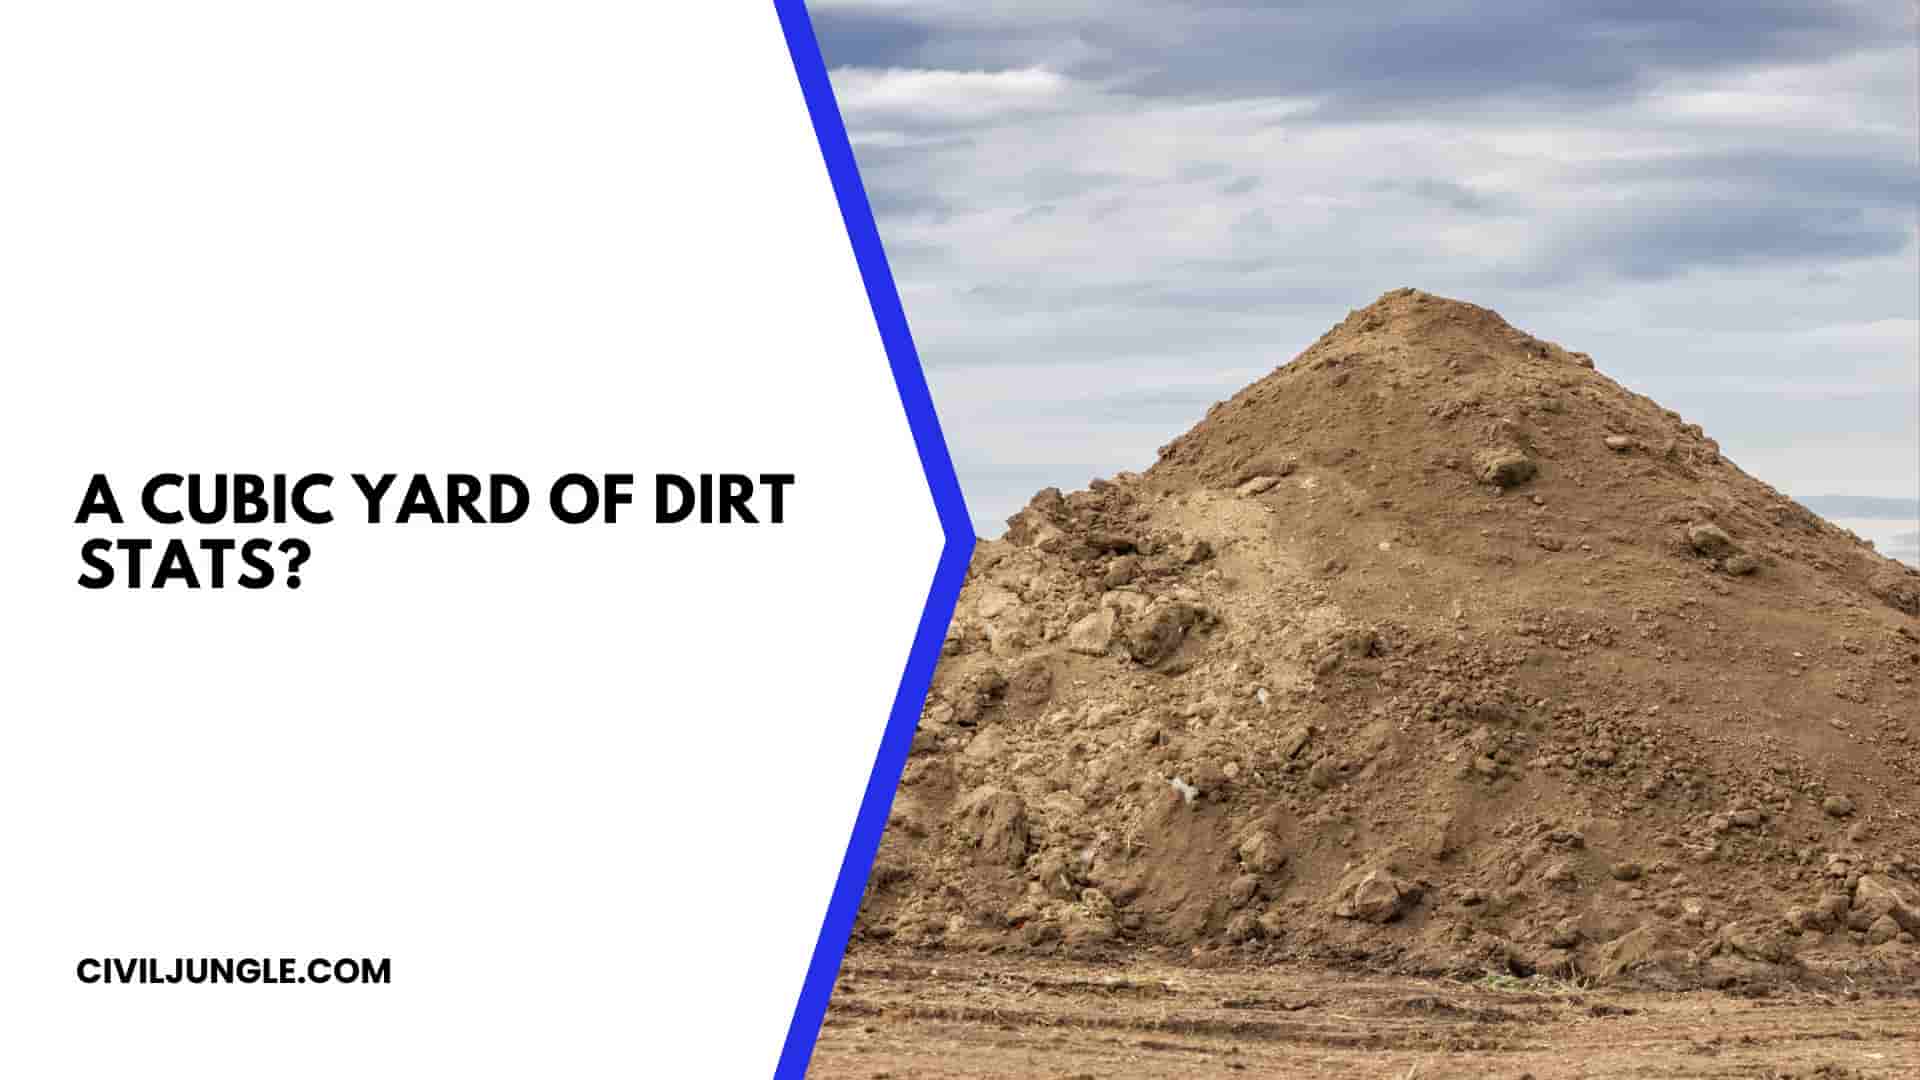 A Cubic Yard of Dirt Stats?